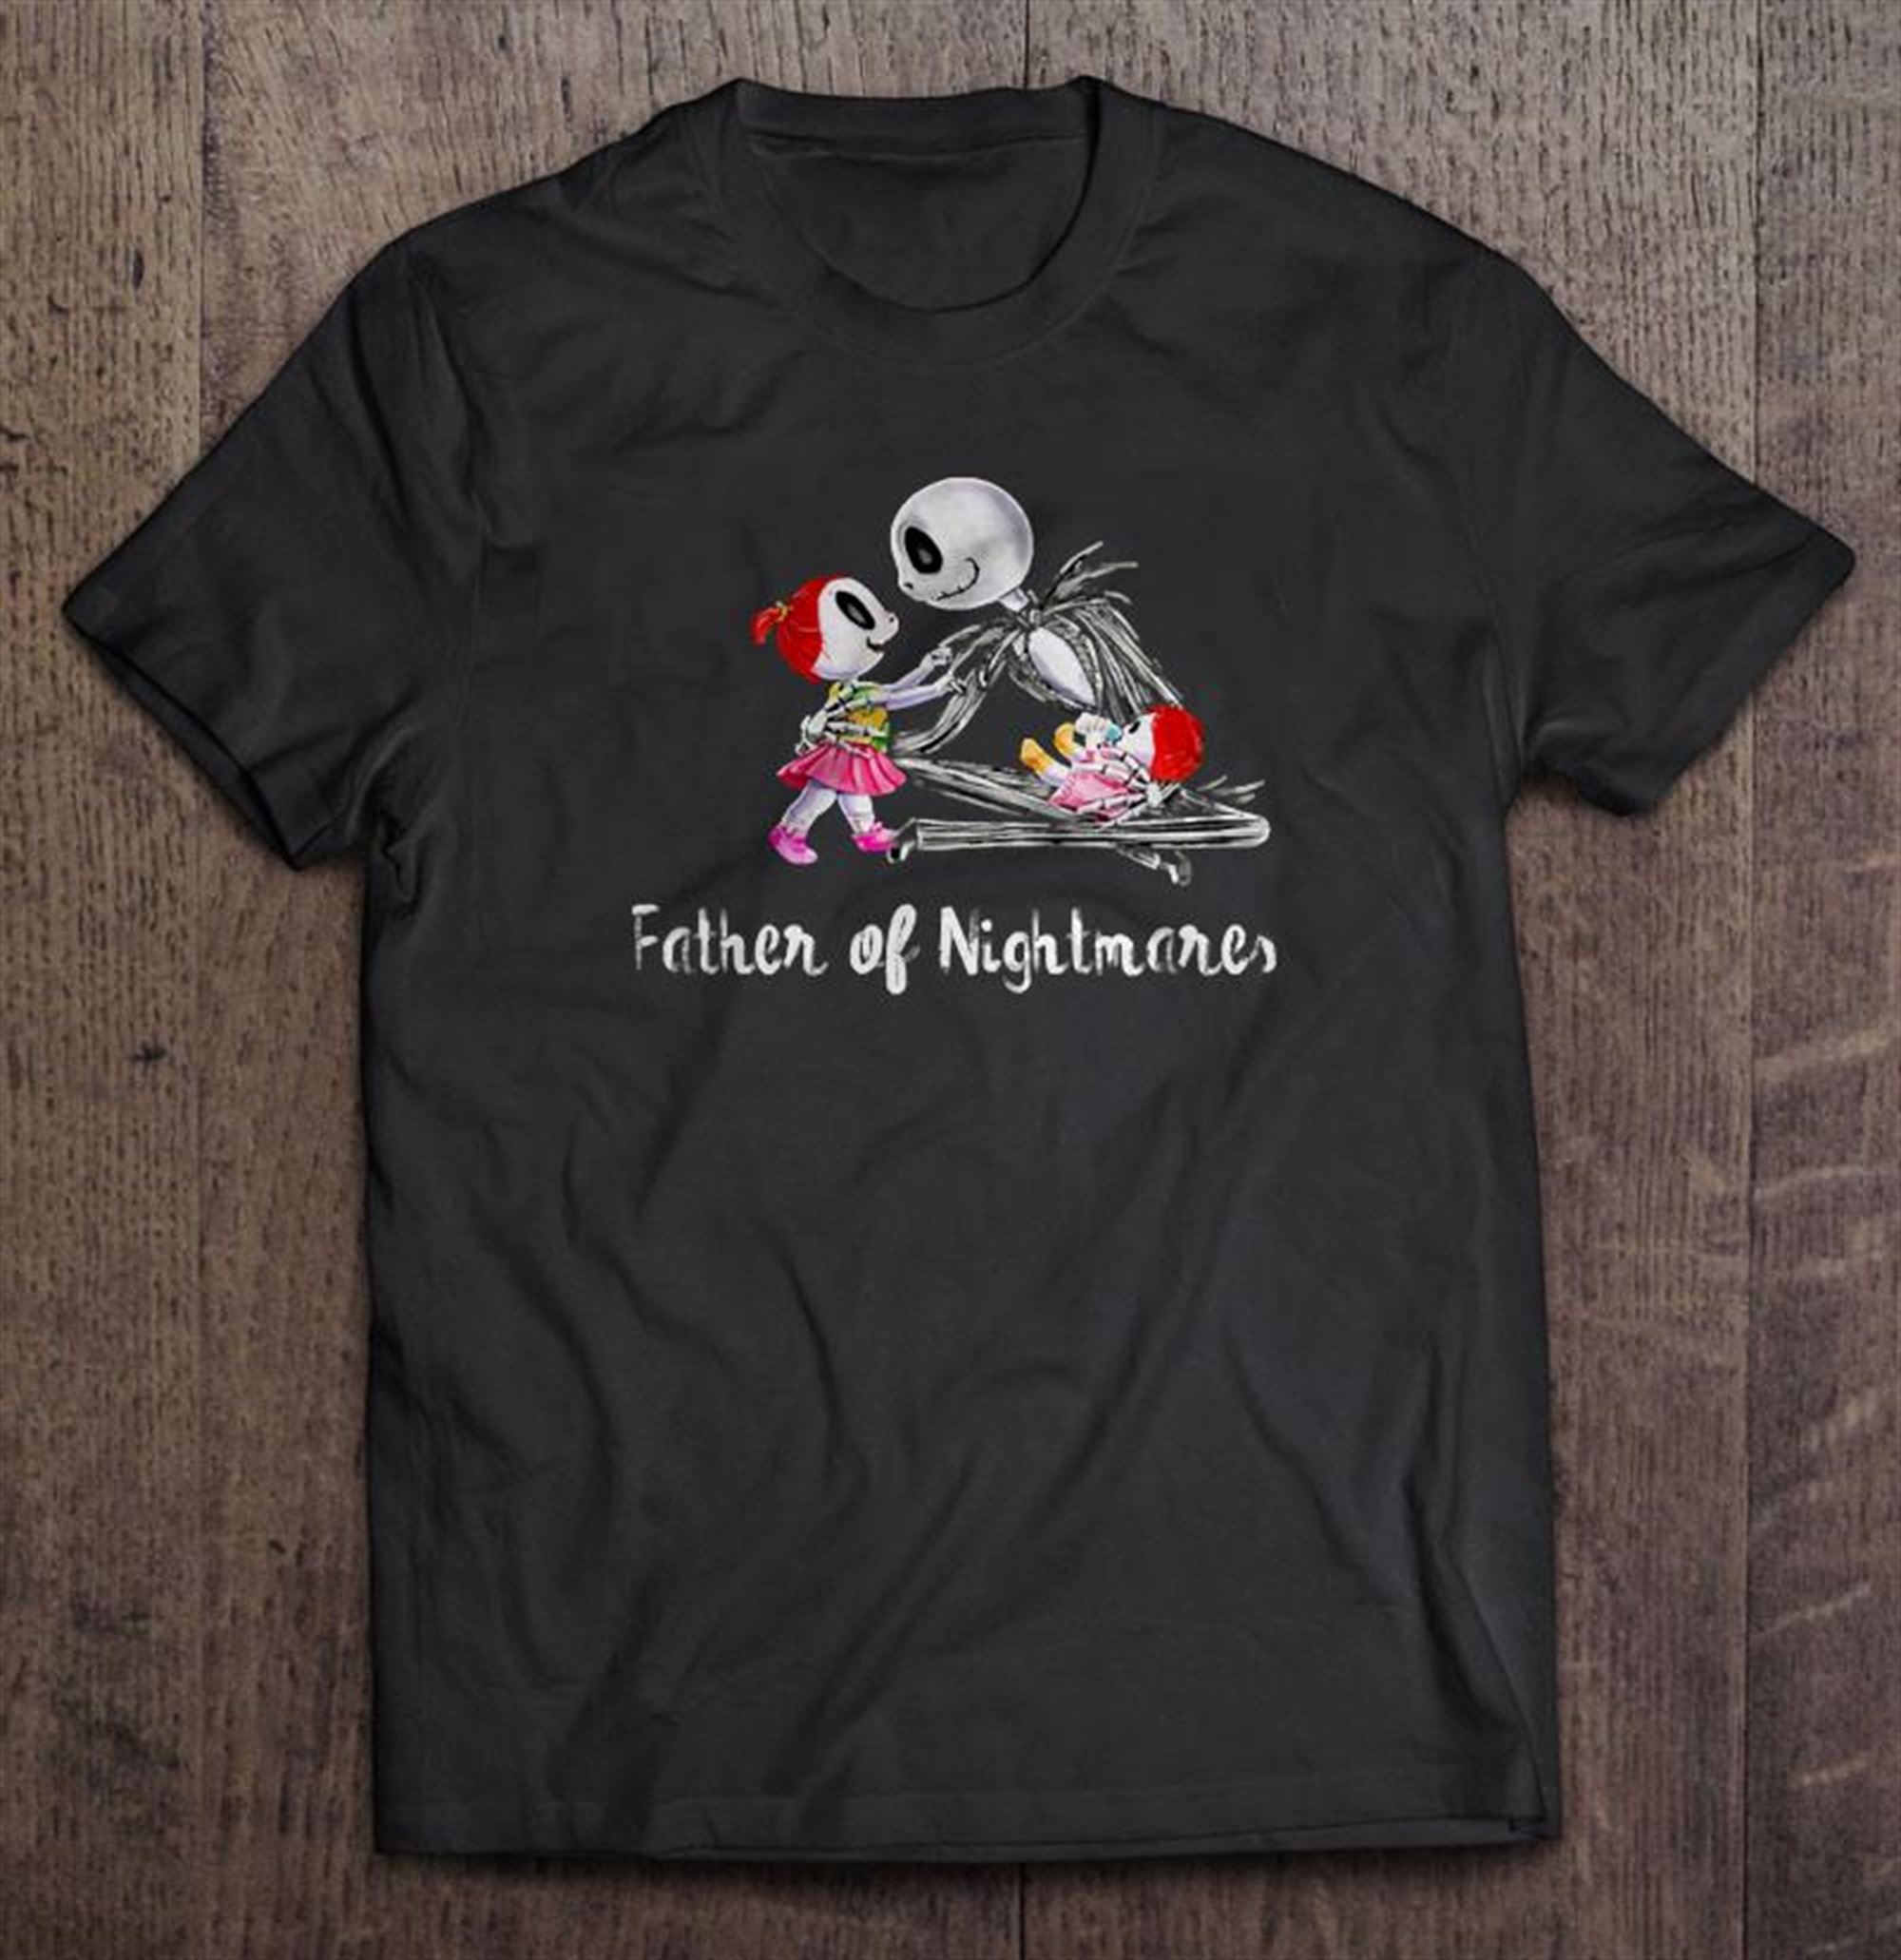 The Nightmare Before Christmas Movie Halloween Father Of Nightmares T-shirt Full Size Up To 5xl